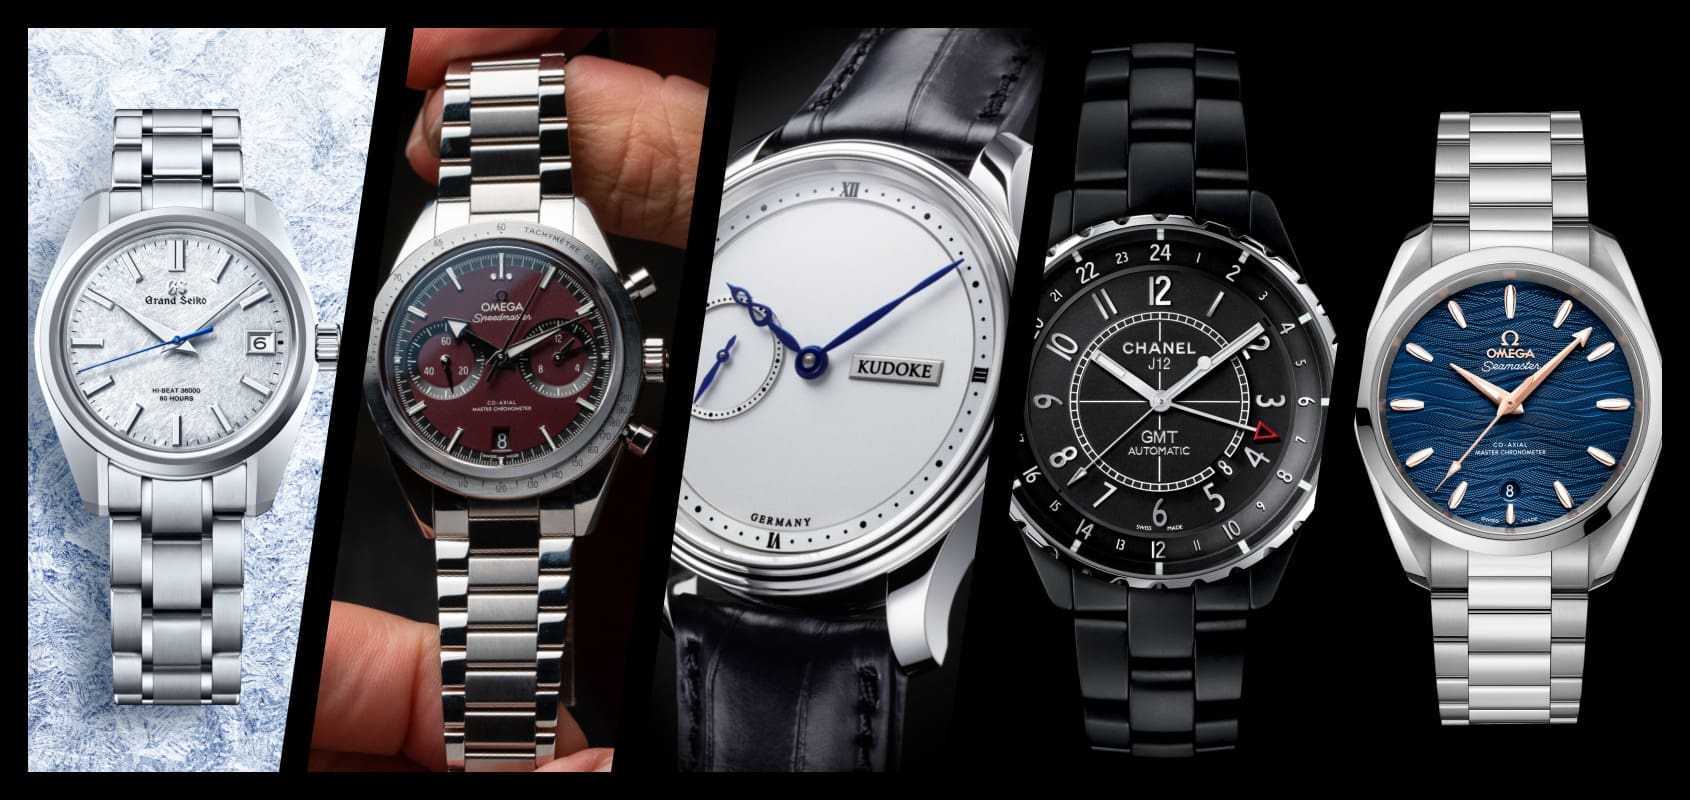 9 Astonishing Diamond Watches From The Top Luxury Watch Brands